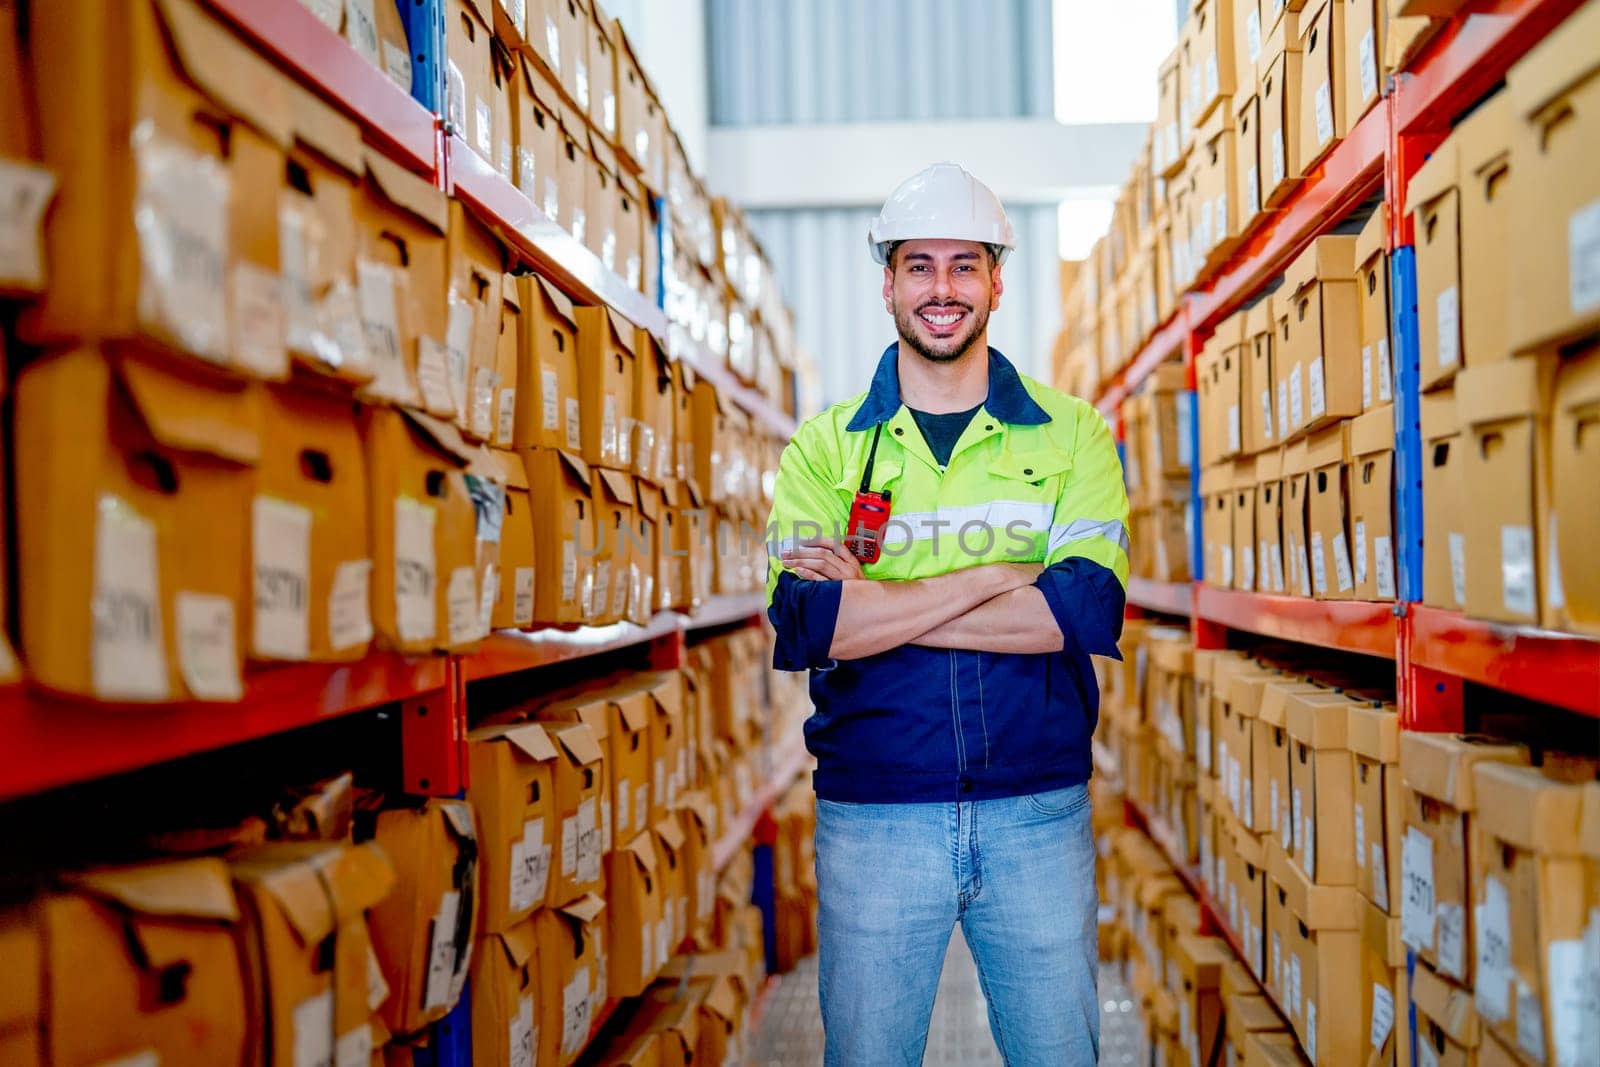 Professional warehouse worker man stand with arm-crossed and smiling to camera also stay between shelves of product boxes in workplace area.